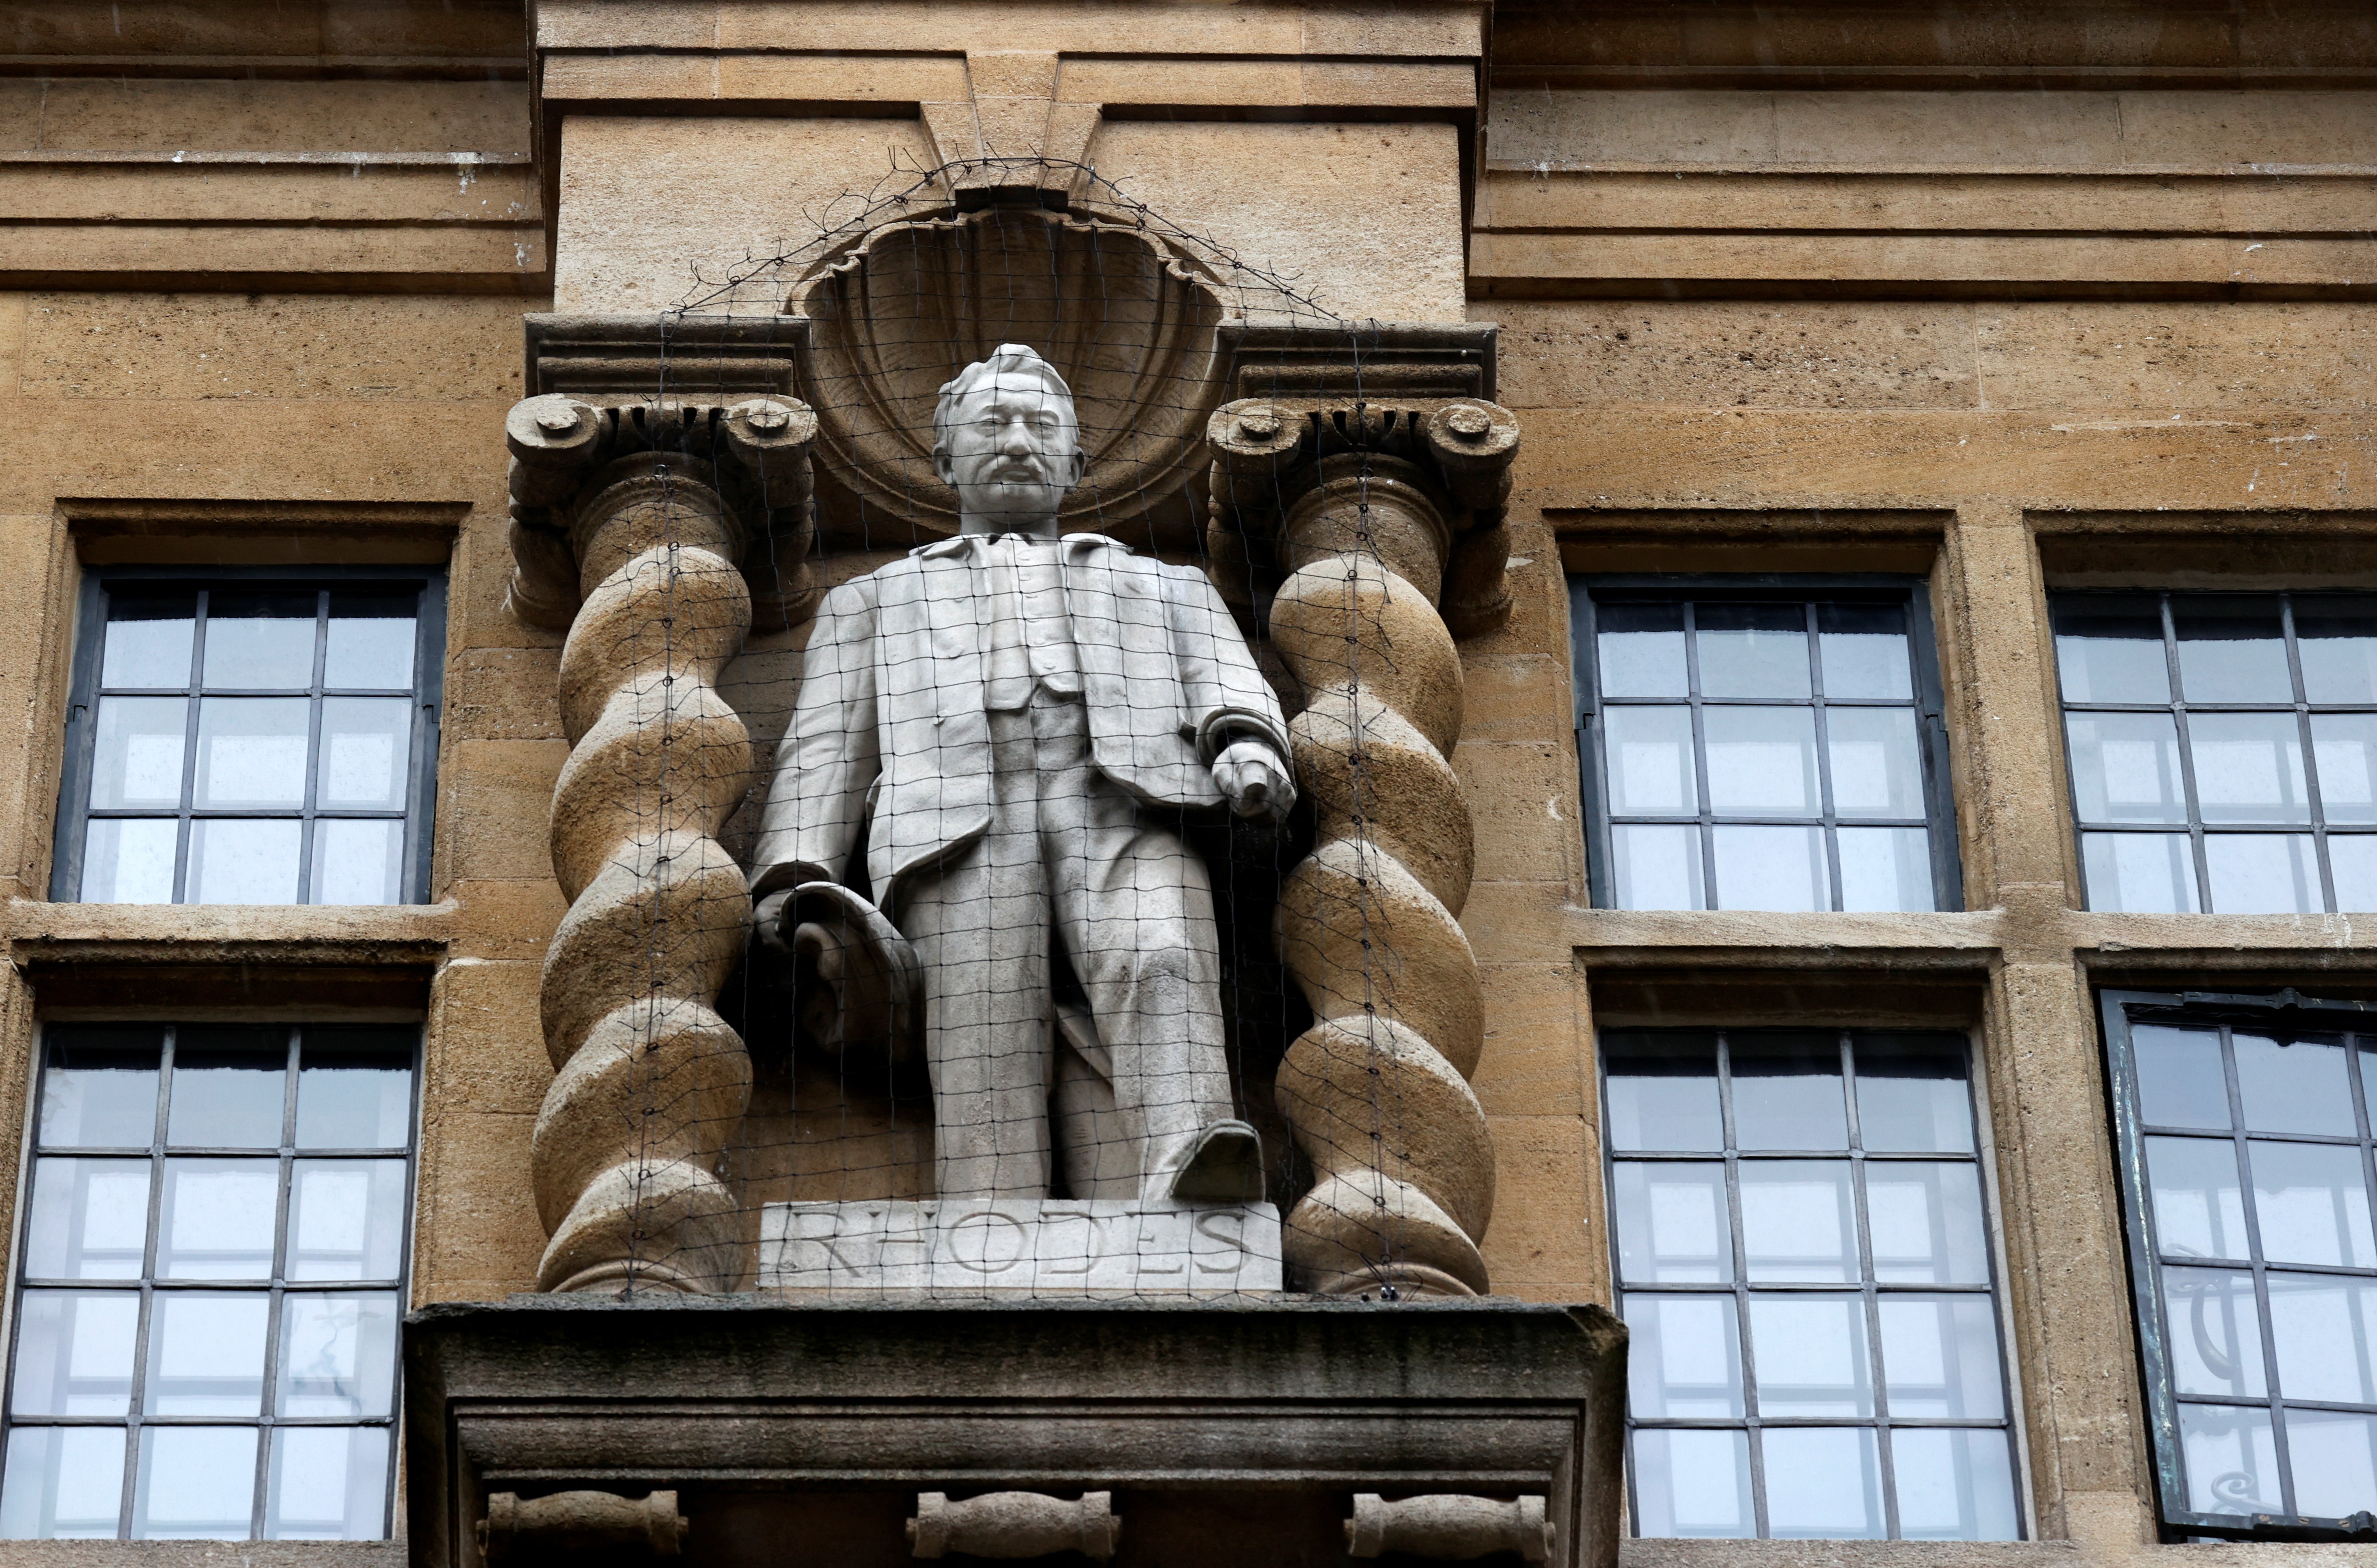 The statue is located in Oriel College, a consituent part of Oxford University